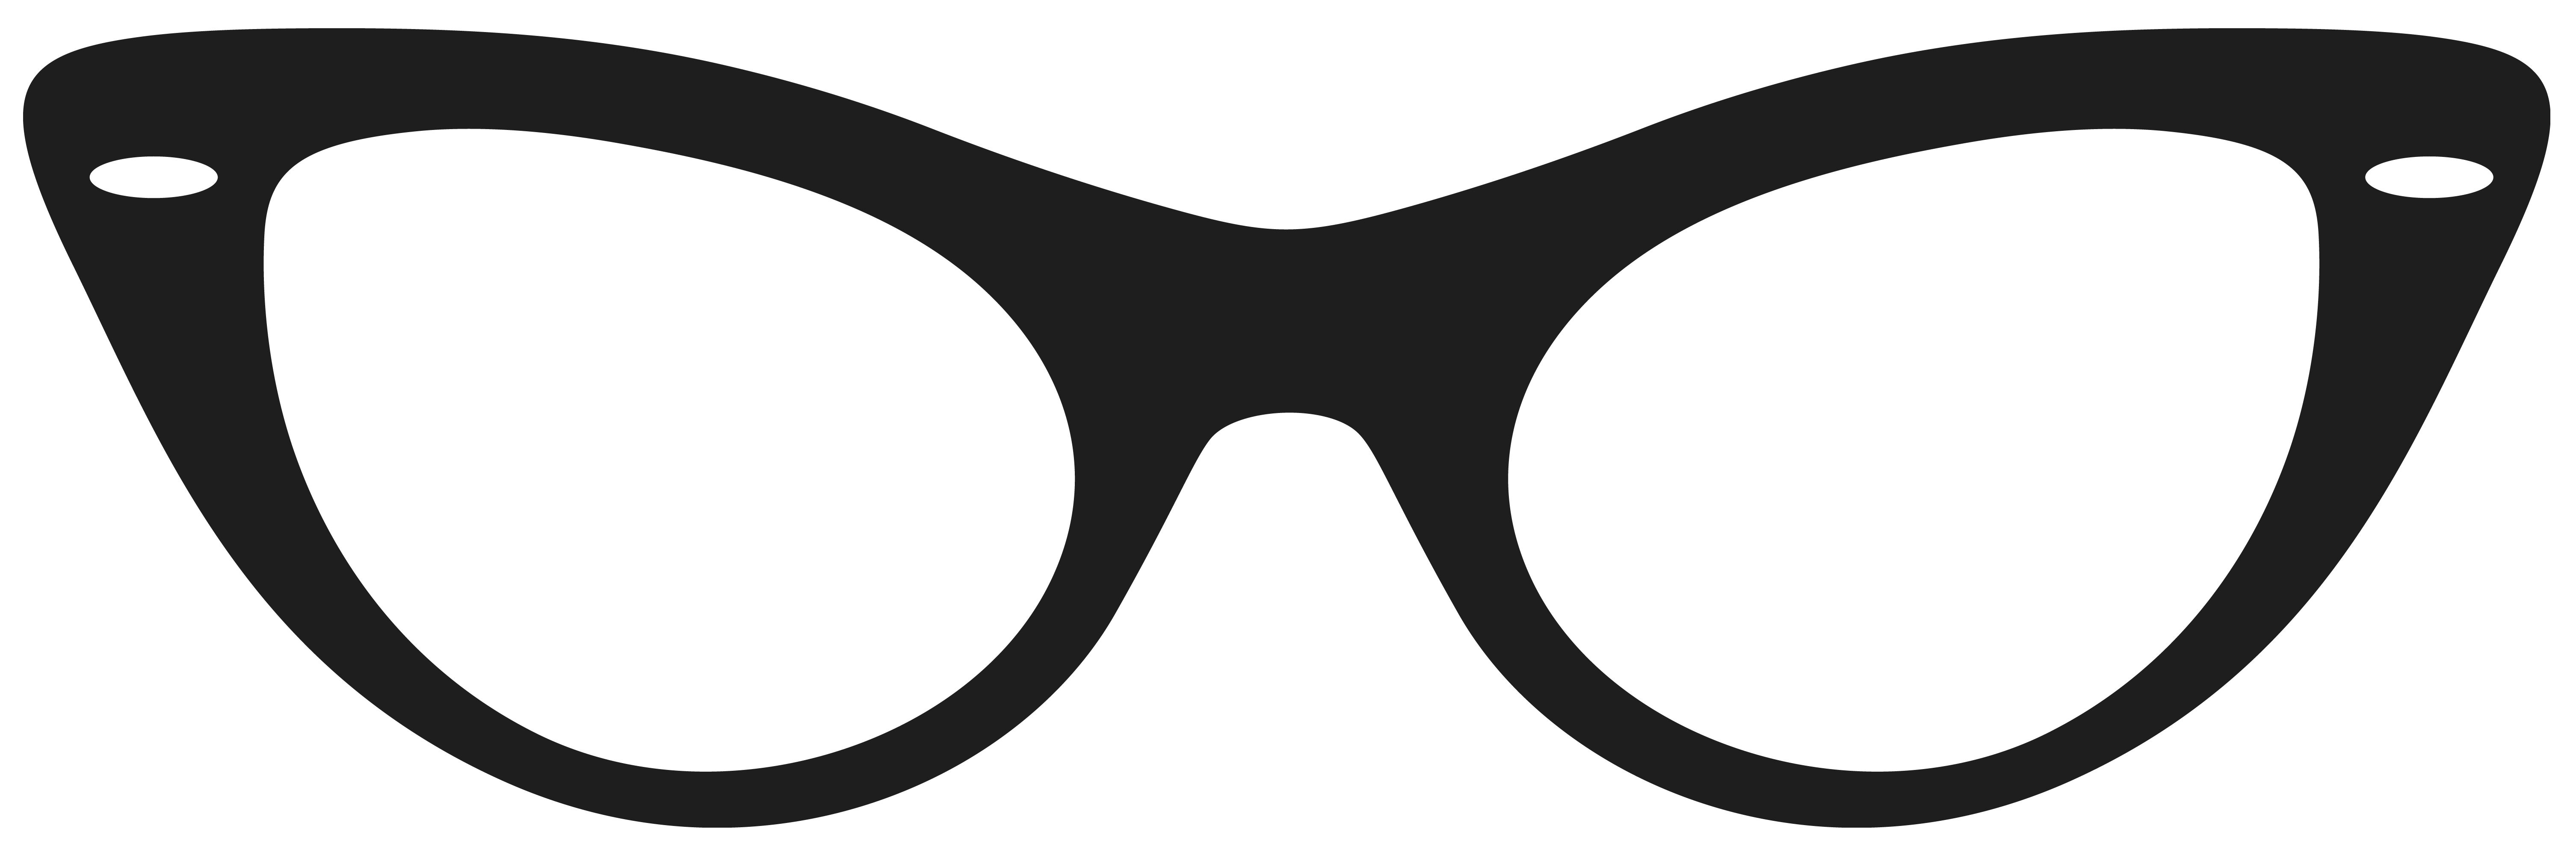 Sunglasses Frame Free PNG